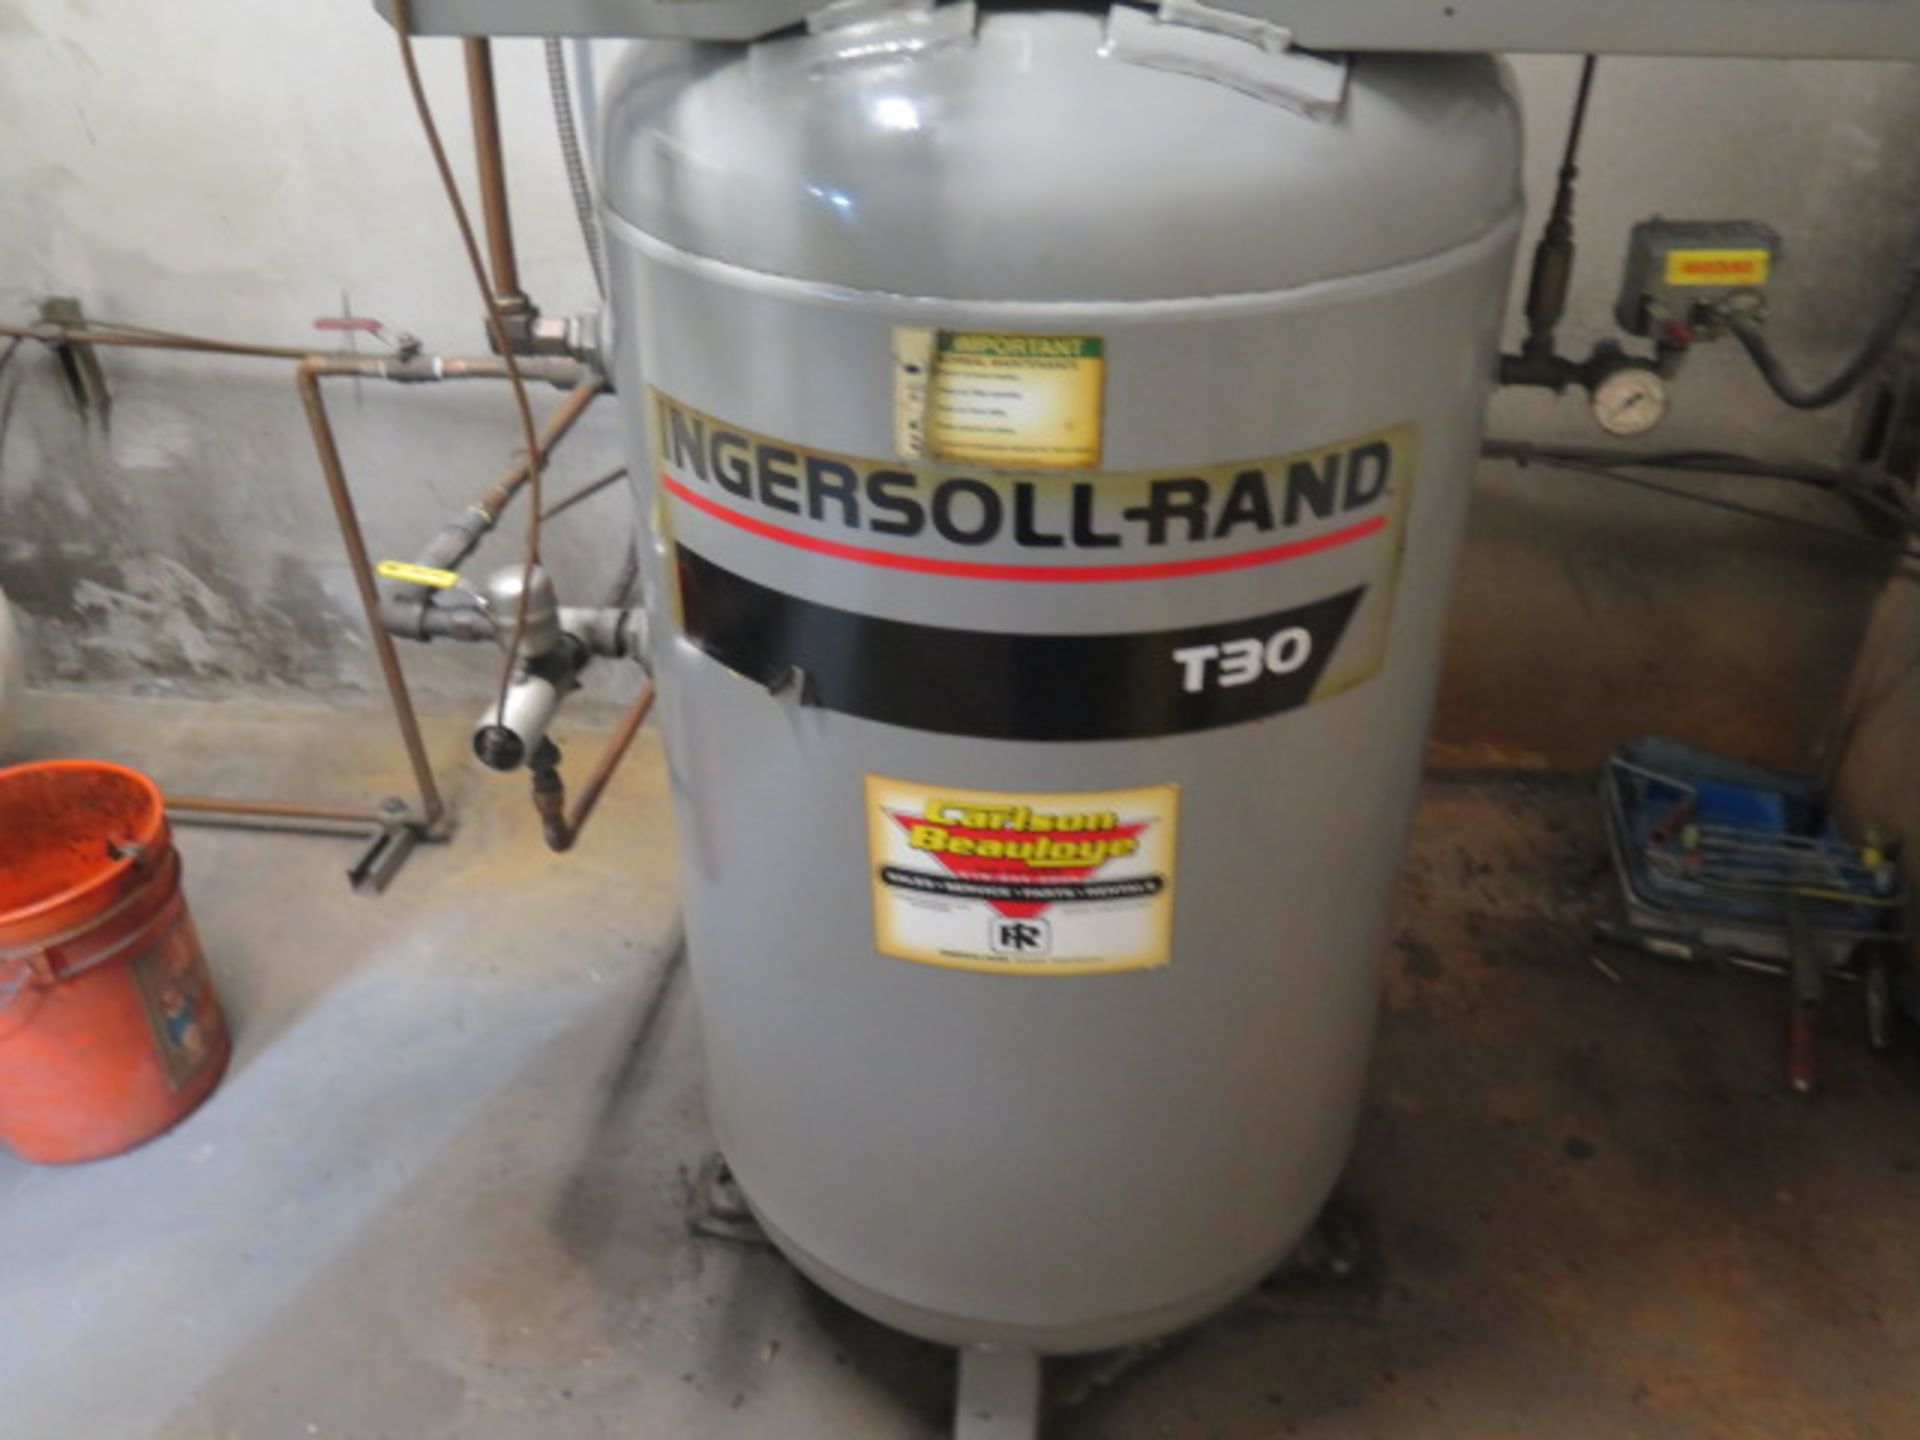 Ingersoll Rand T30 10Hp Vertical Air Compressor s/n 30T-889067 w/ 2-Stage Pump, 80 Gallon Tank - Image 4 of 5